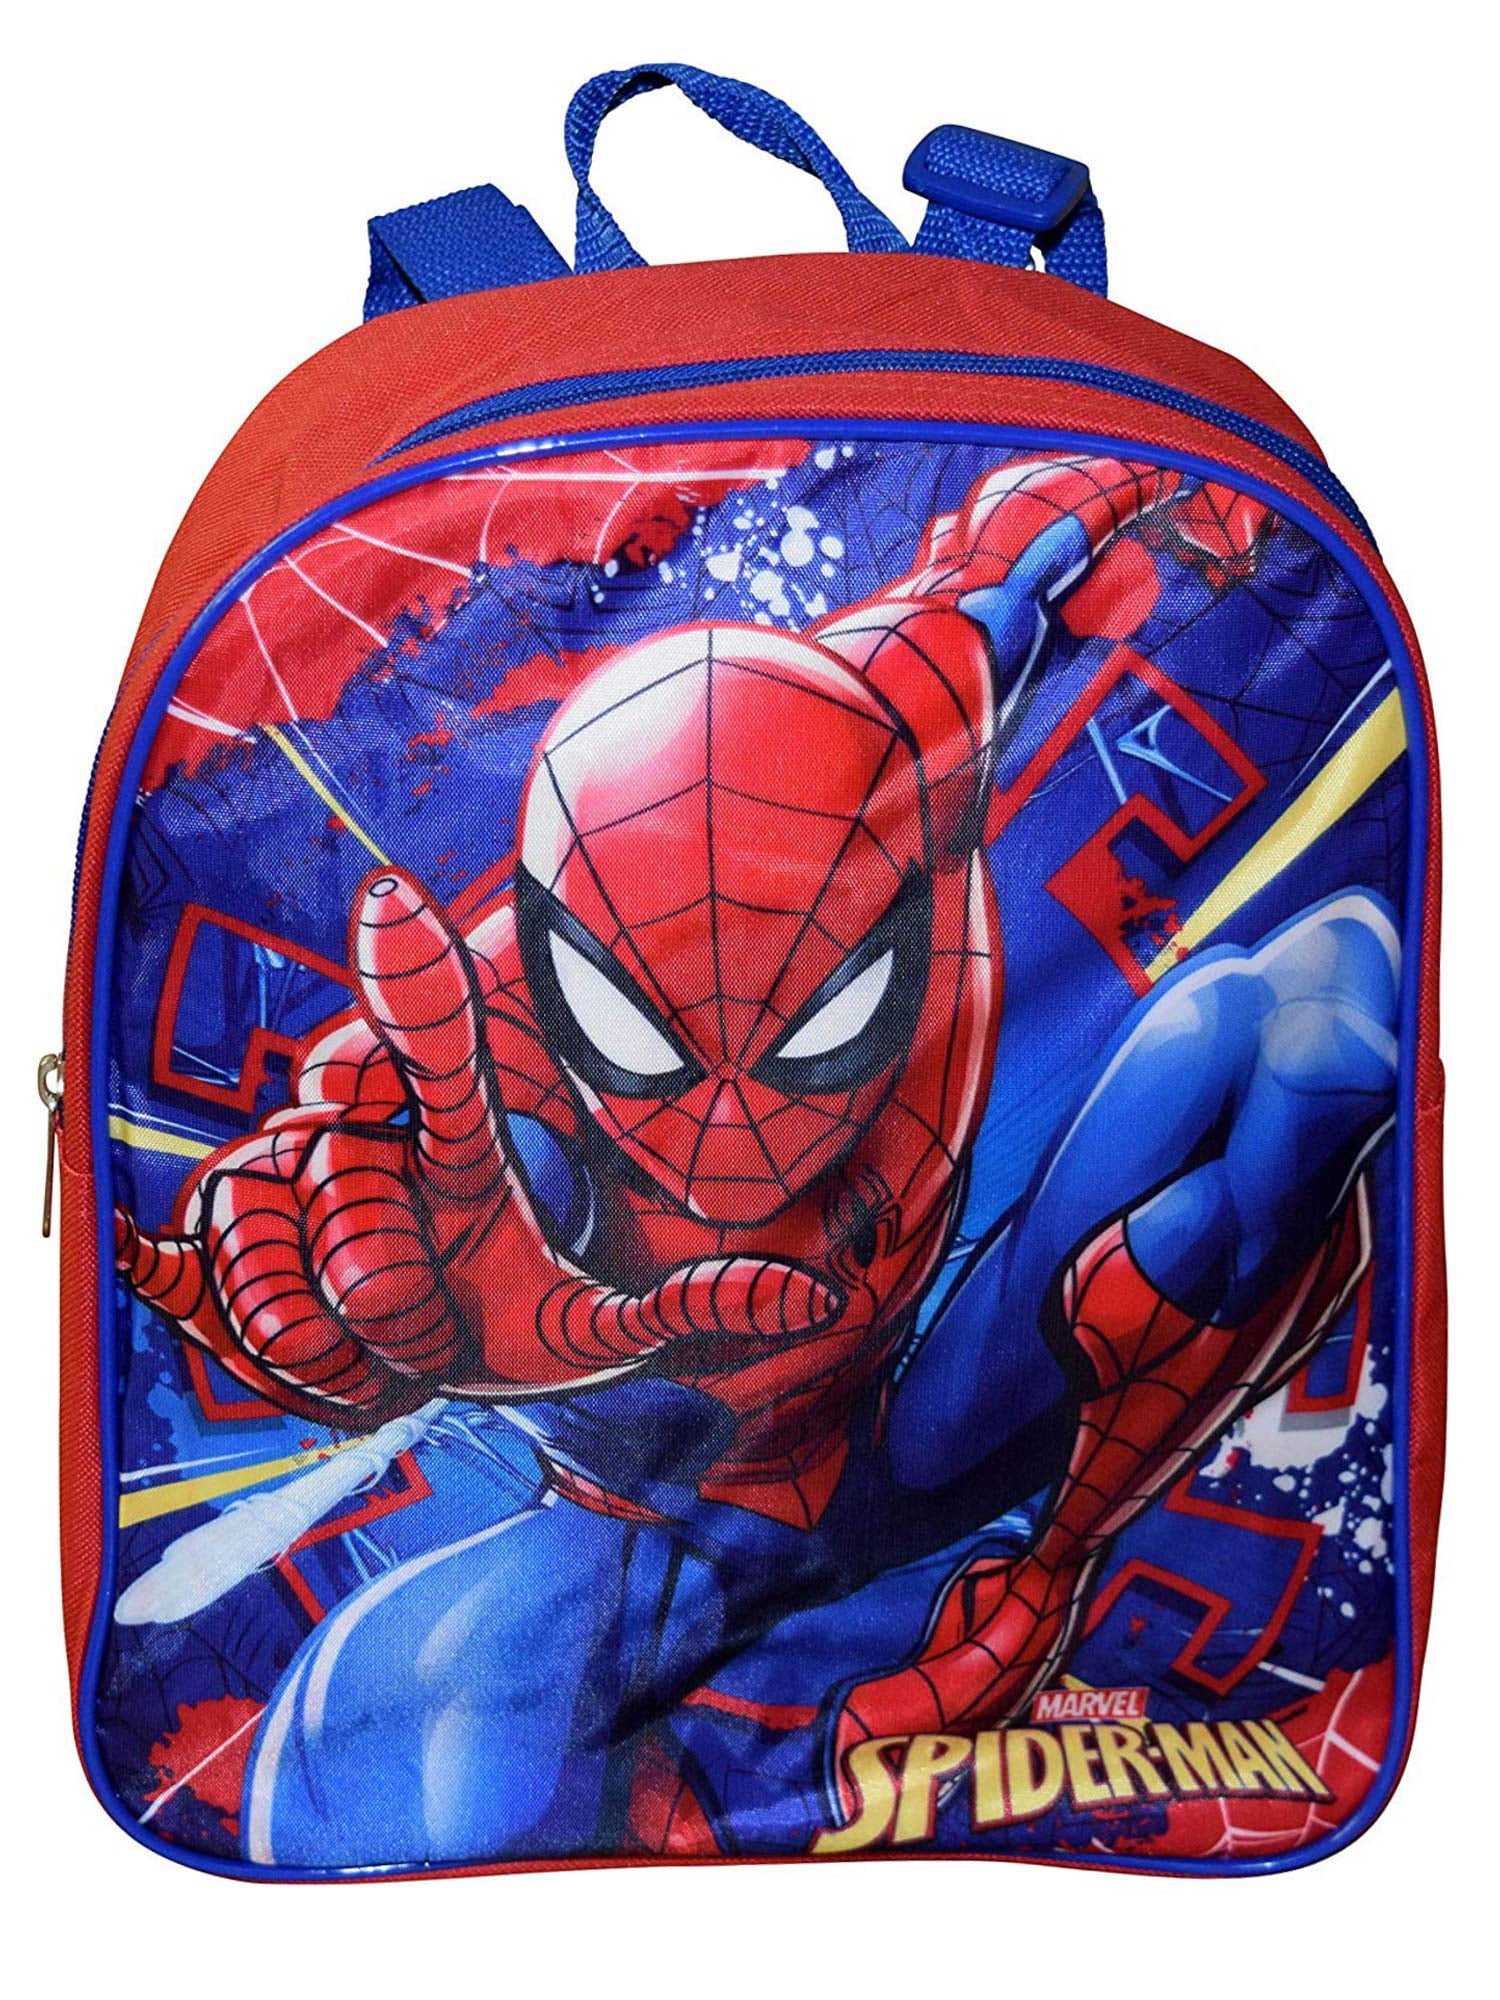 Marvel The Amazing Spider-Man Kids Boys Red Blue Backpack Bag NWT 